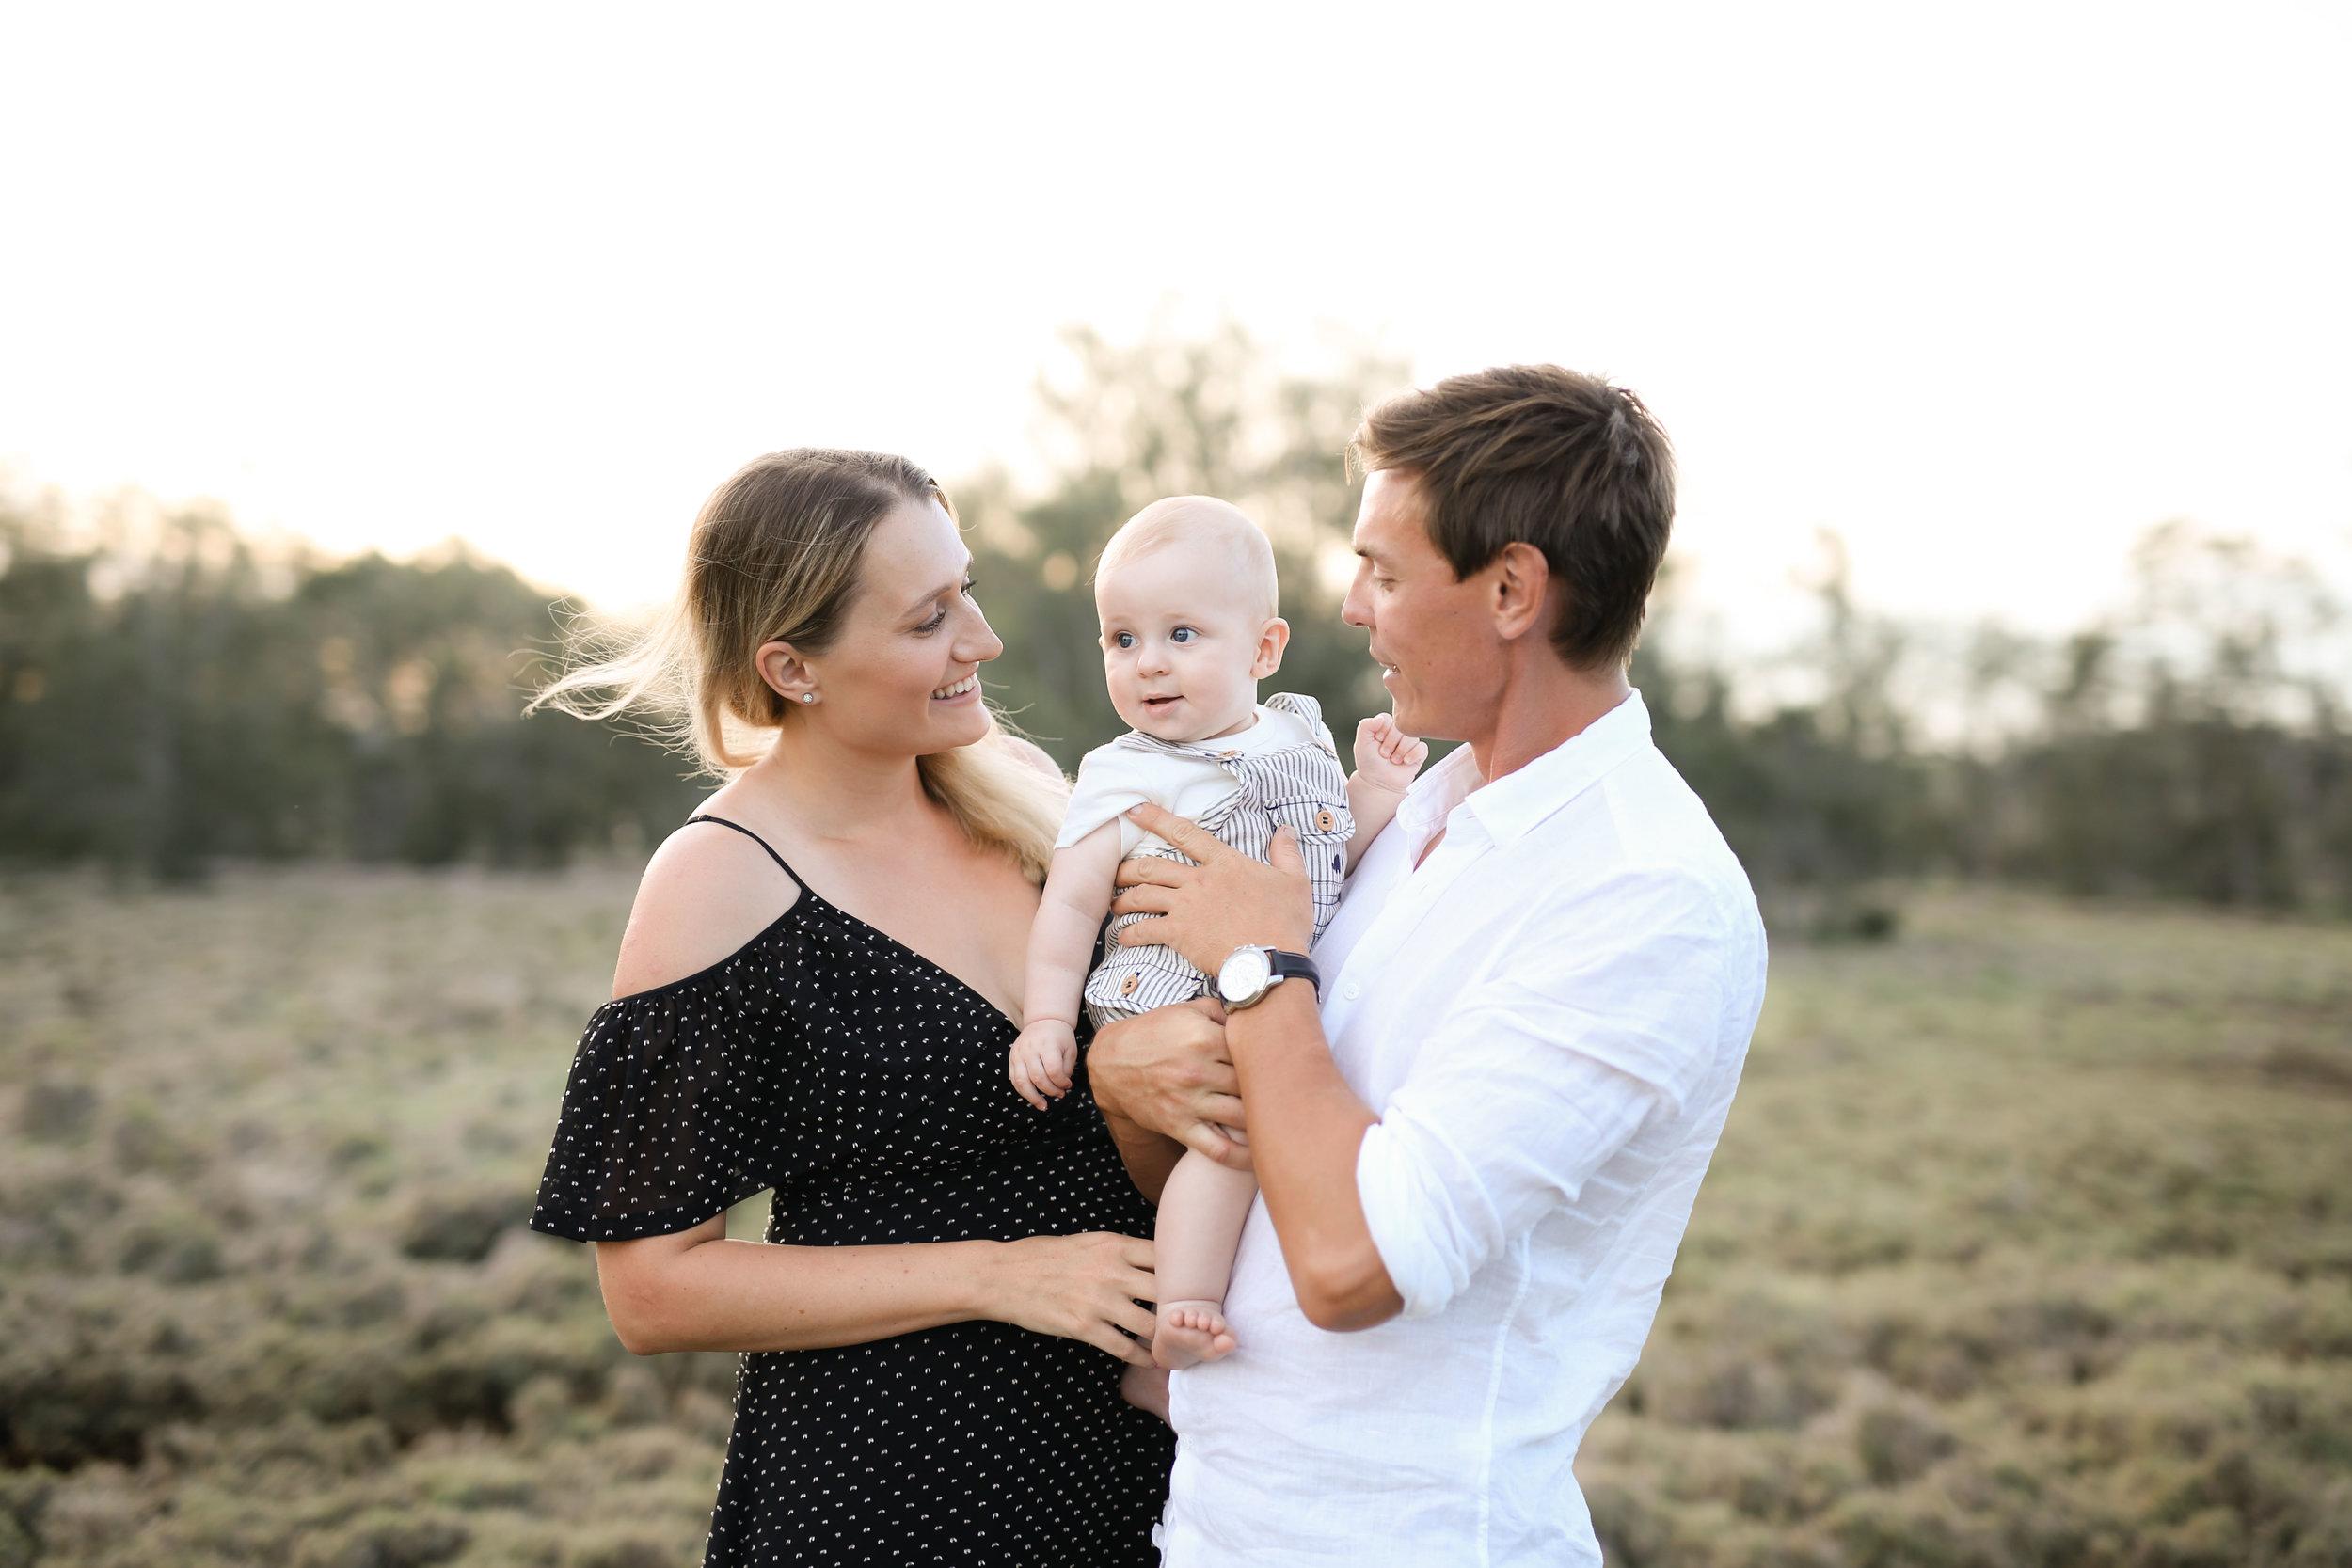 Little boy with his mum and dad in a grass field